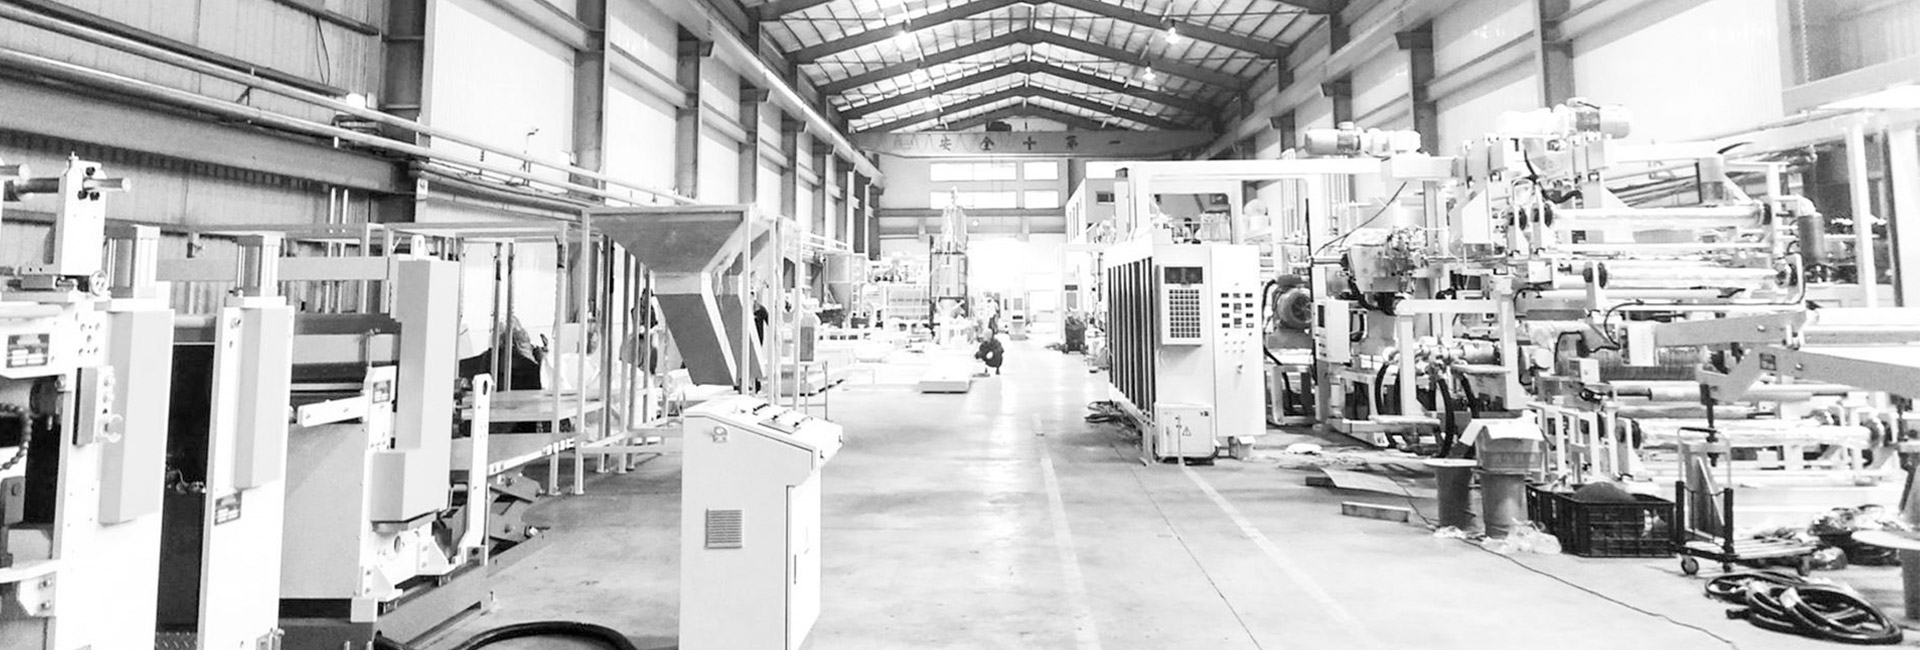 Leader Extrusion Machinery Ind. Co., Ltd